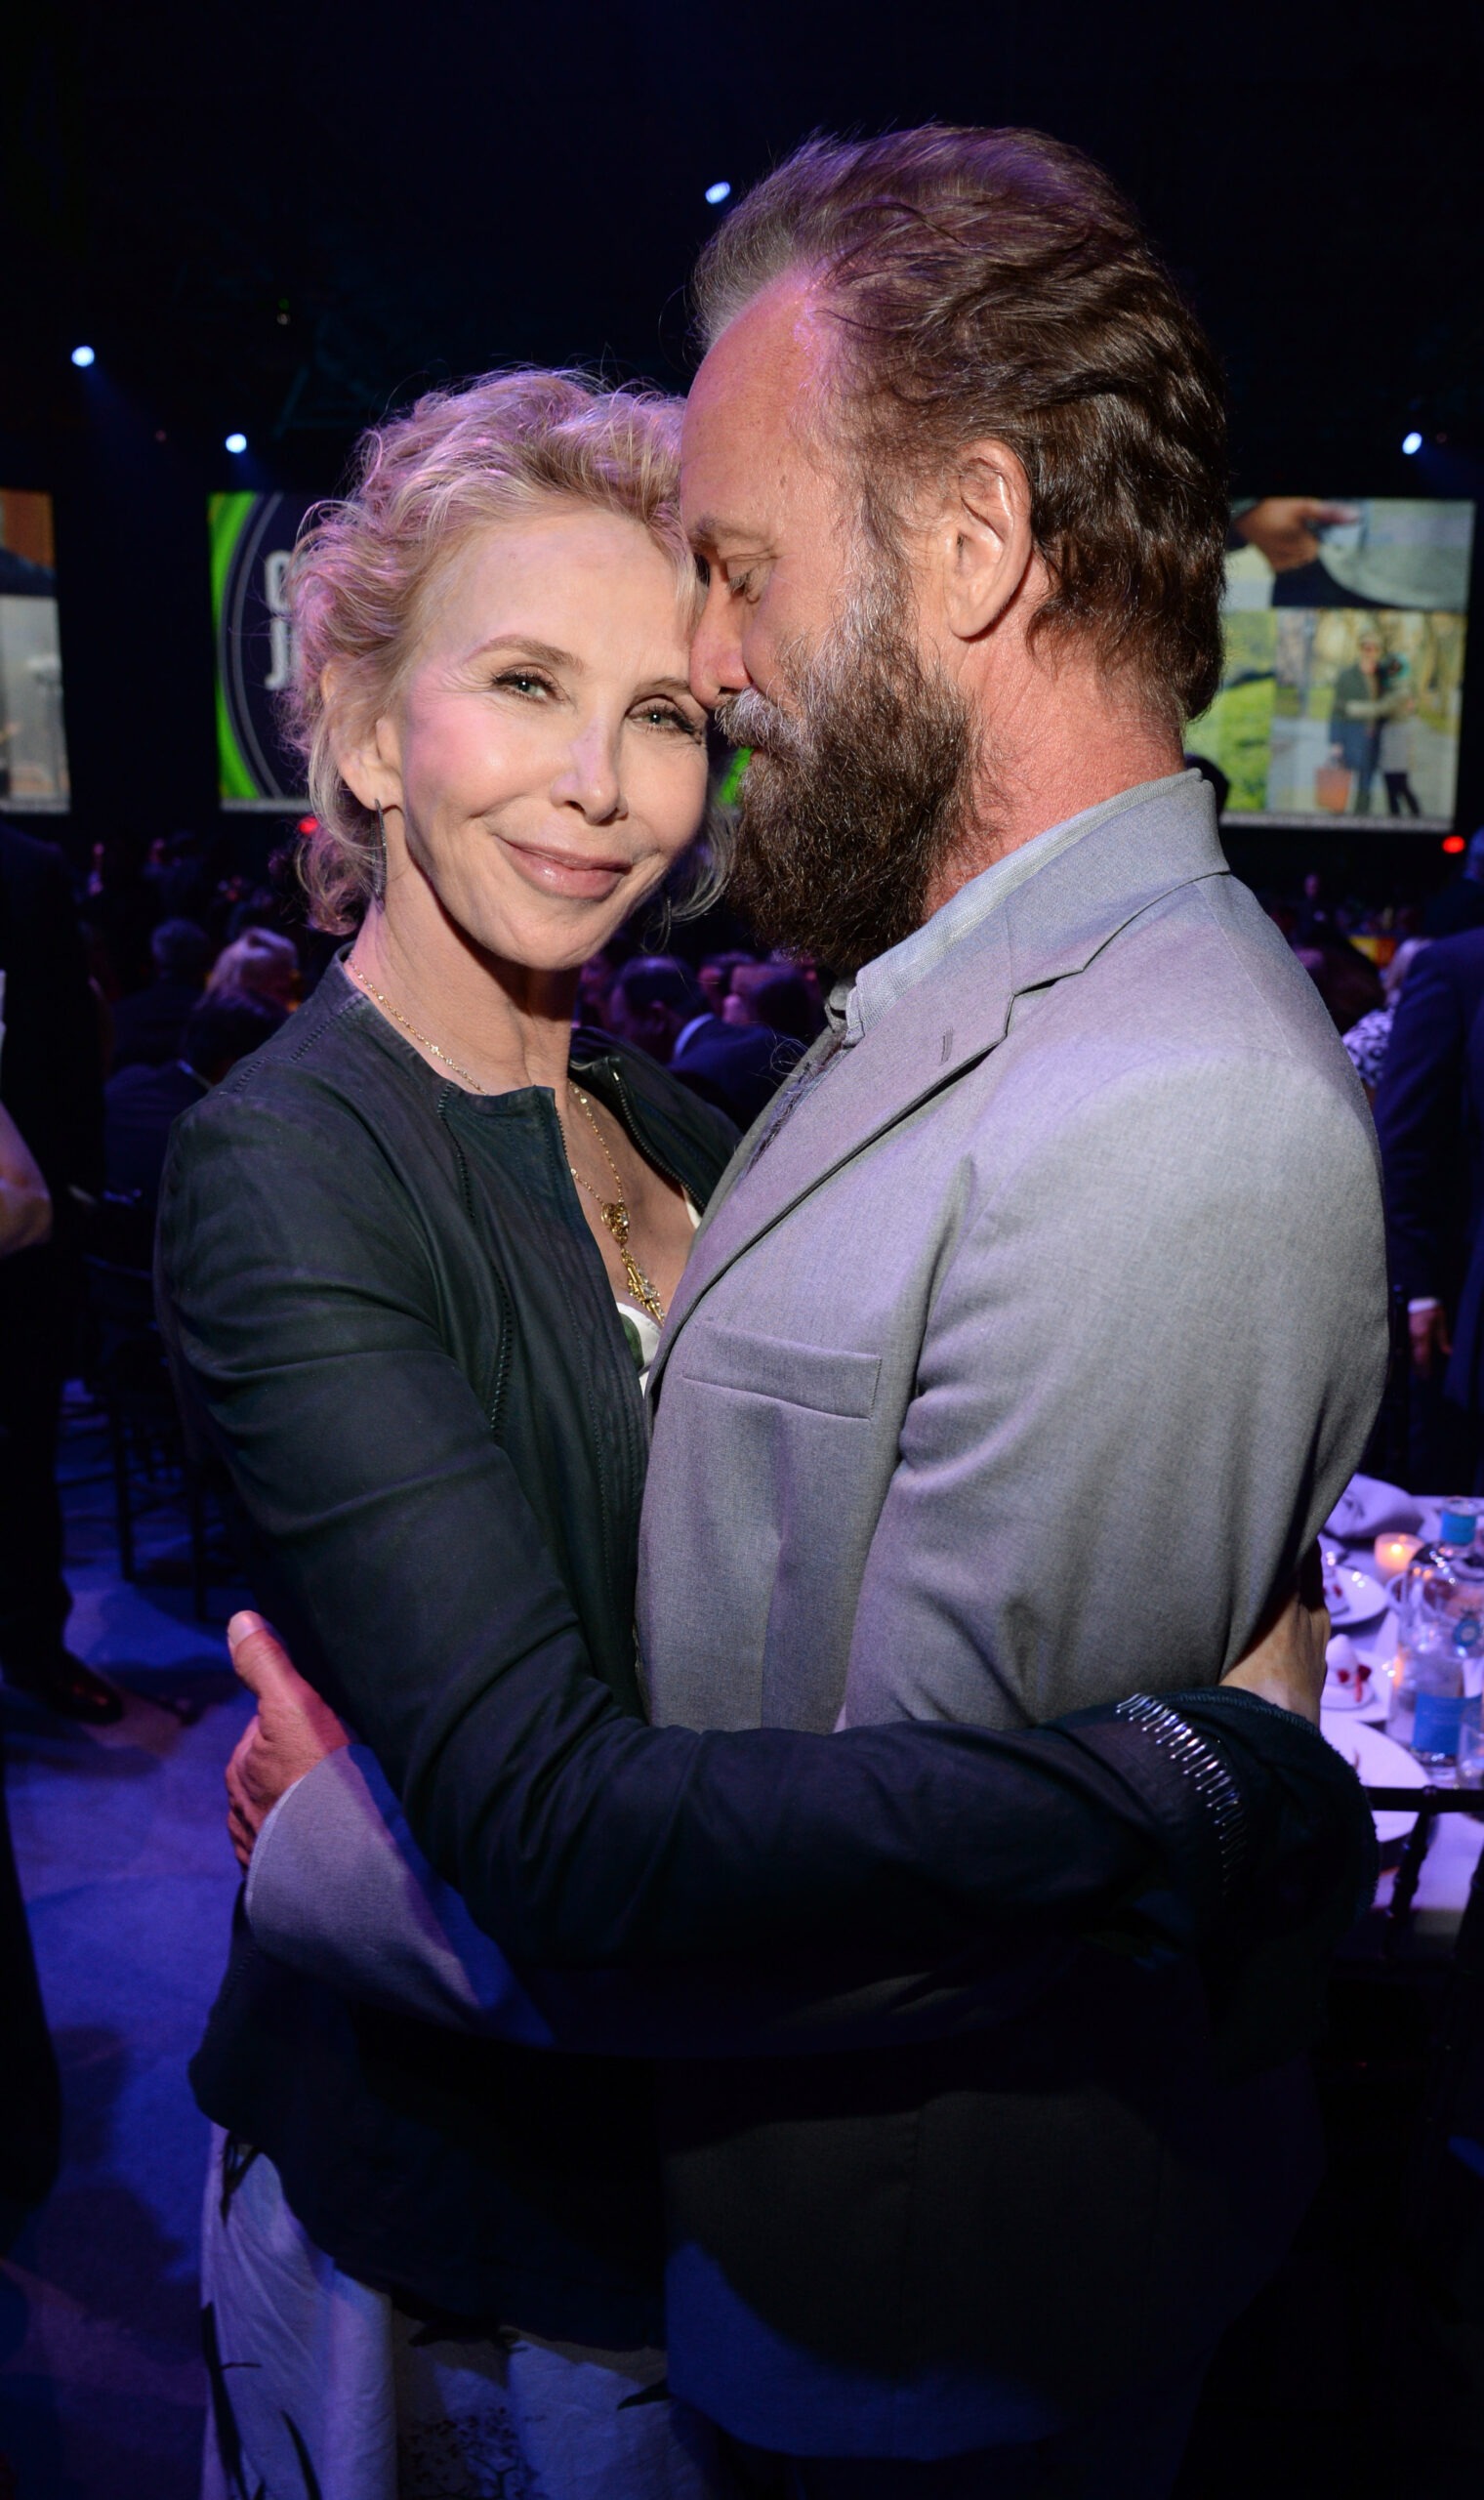 Trudie Styler and Sting at The Robin Hood Foundation's 2015 Benefit at Jacob Javitz Center on May 12, 2015 in New York City. | Source: Getty Images